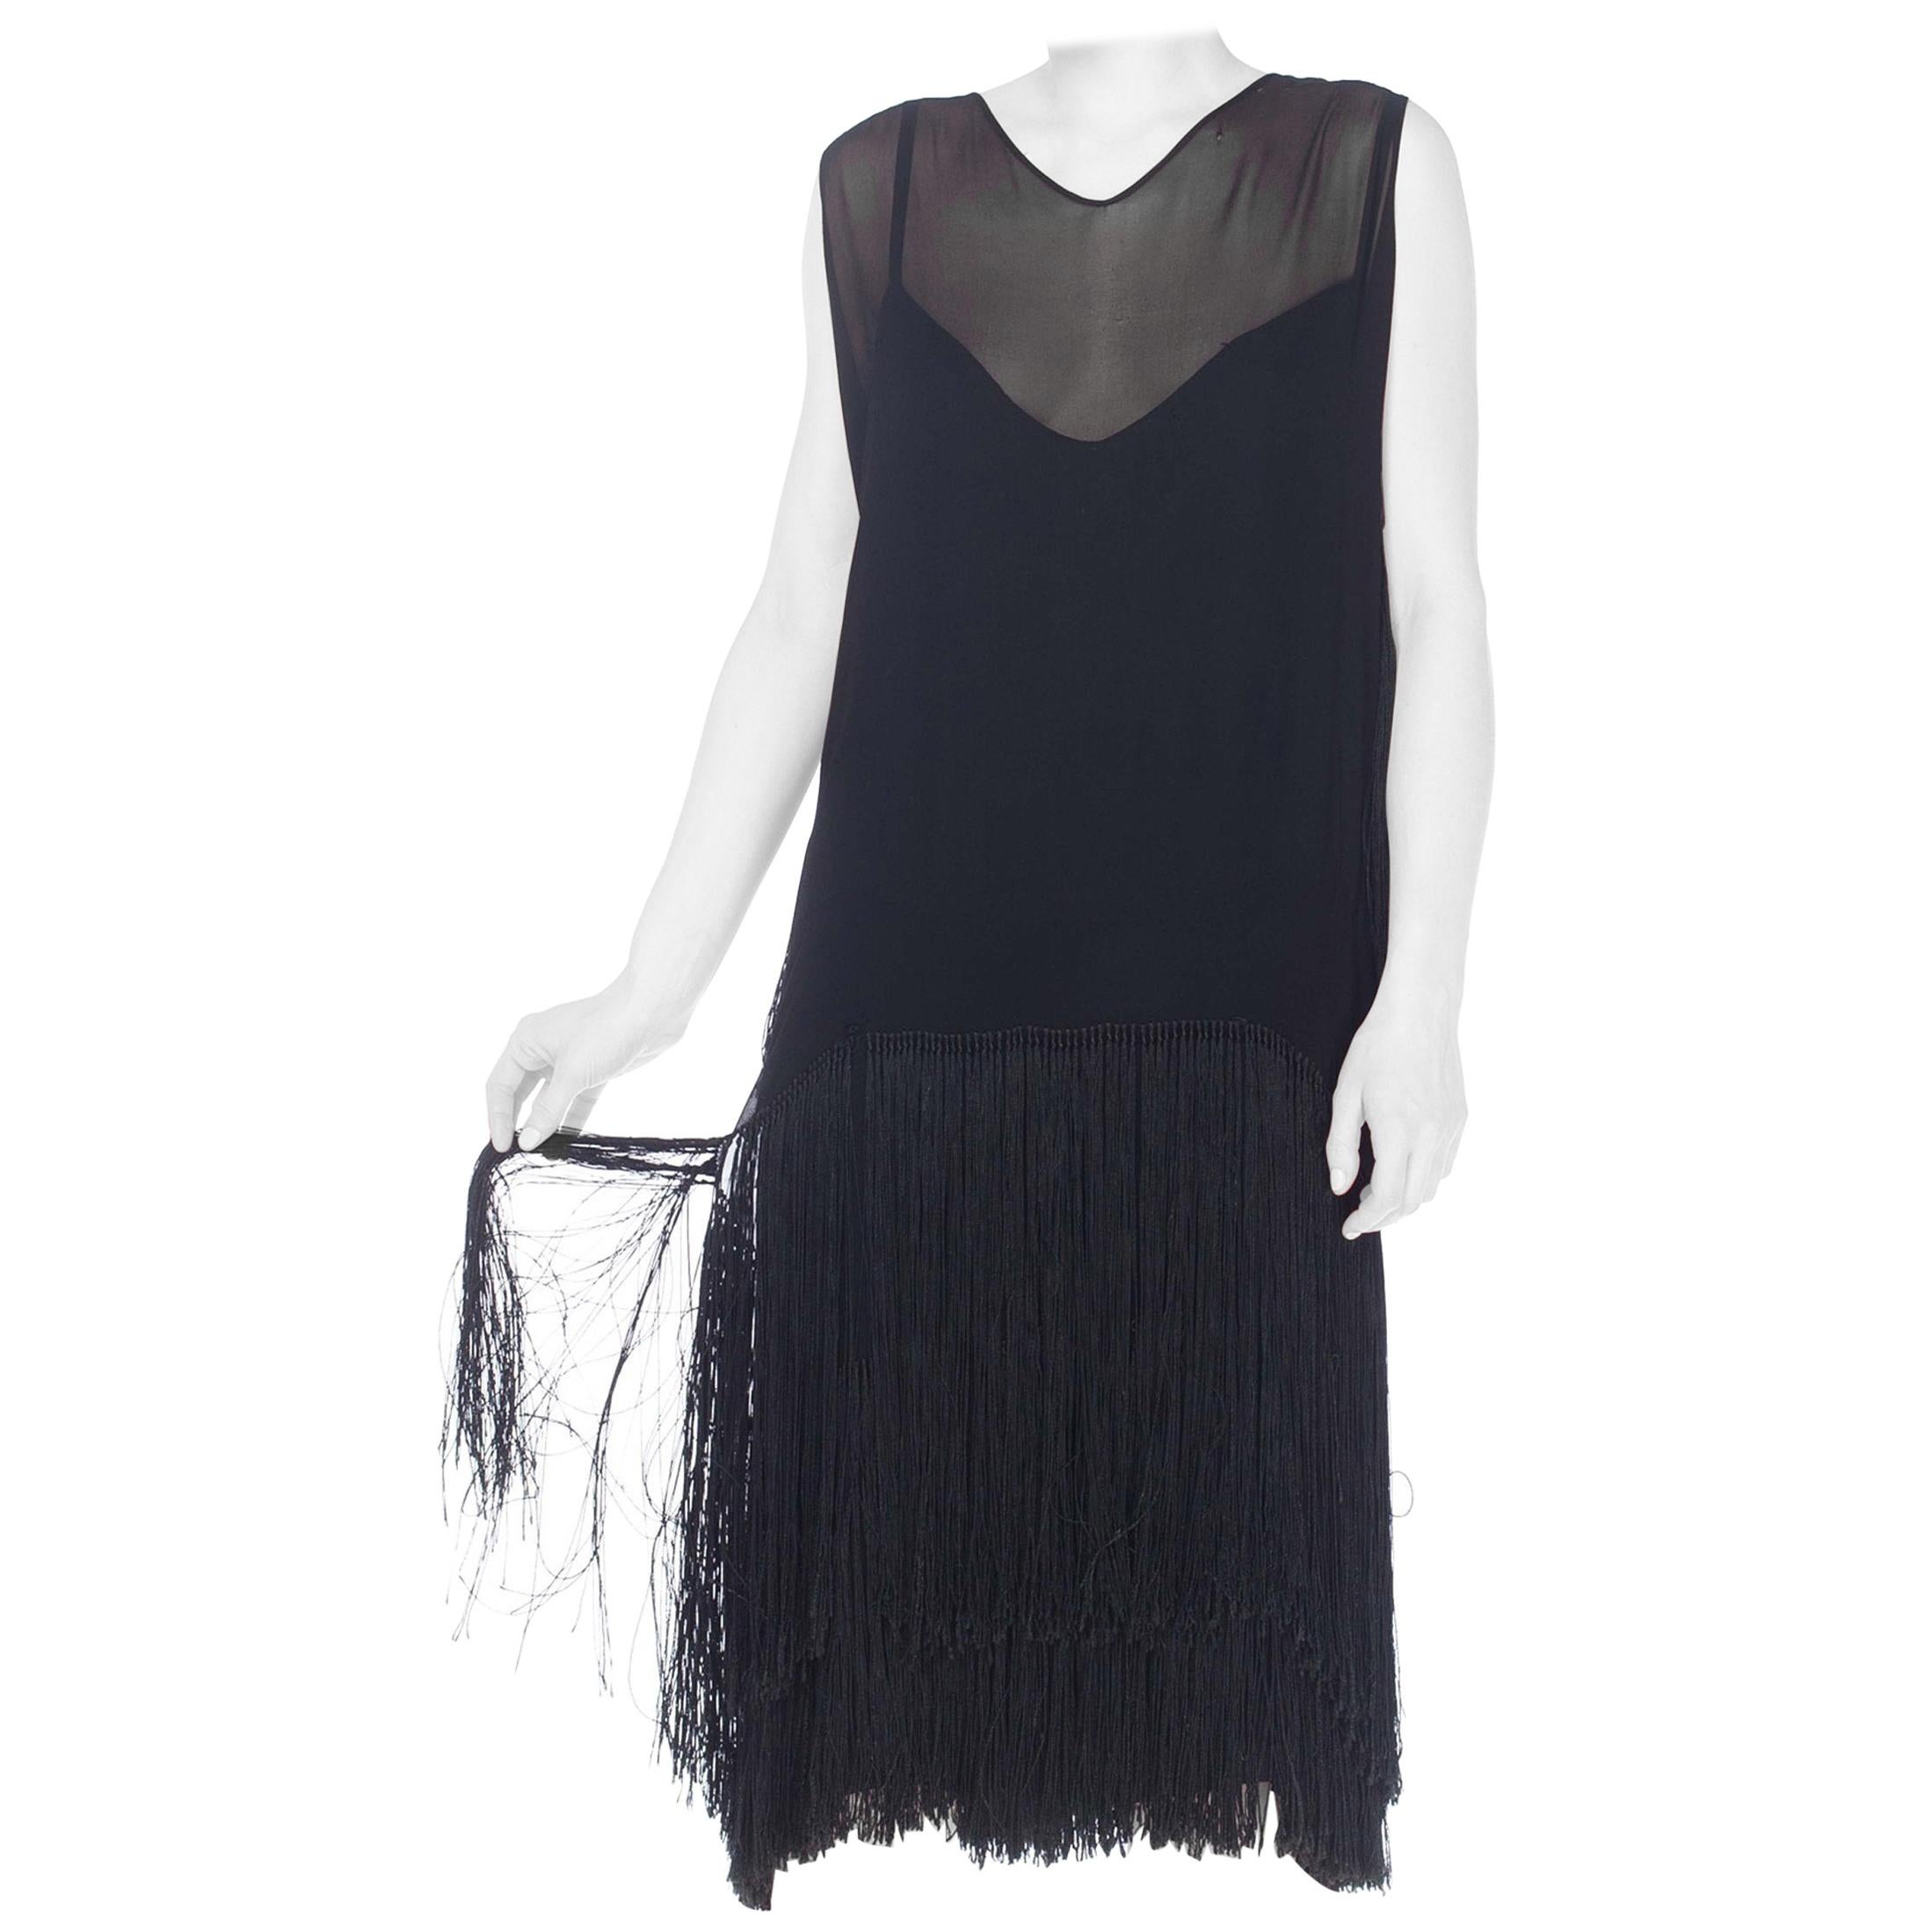 1920S Black Silk Chiffon Cocktail Dress With Fringe Skirt And Back Cape